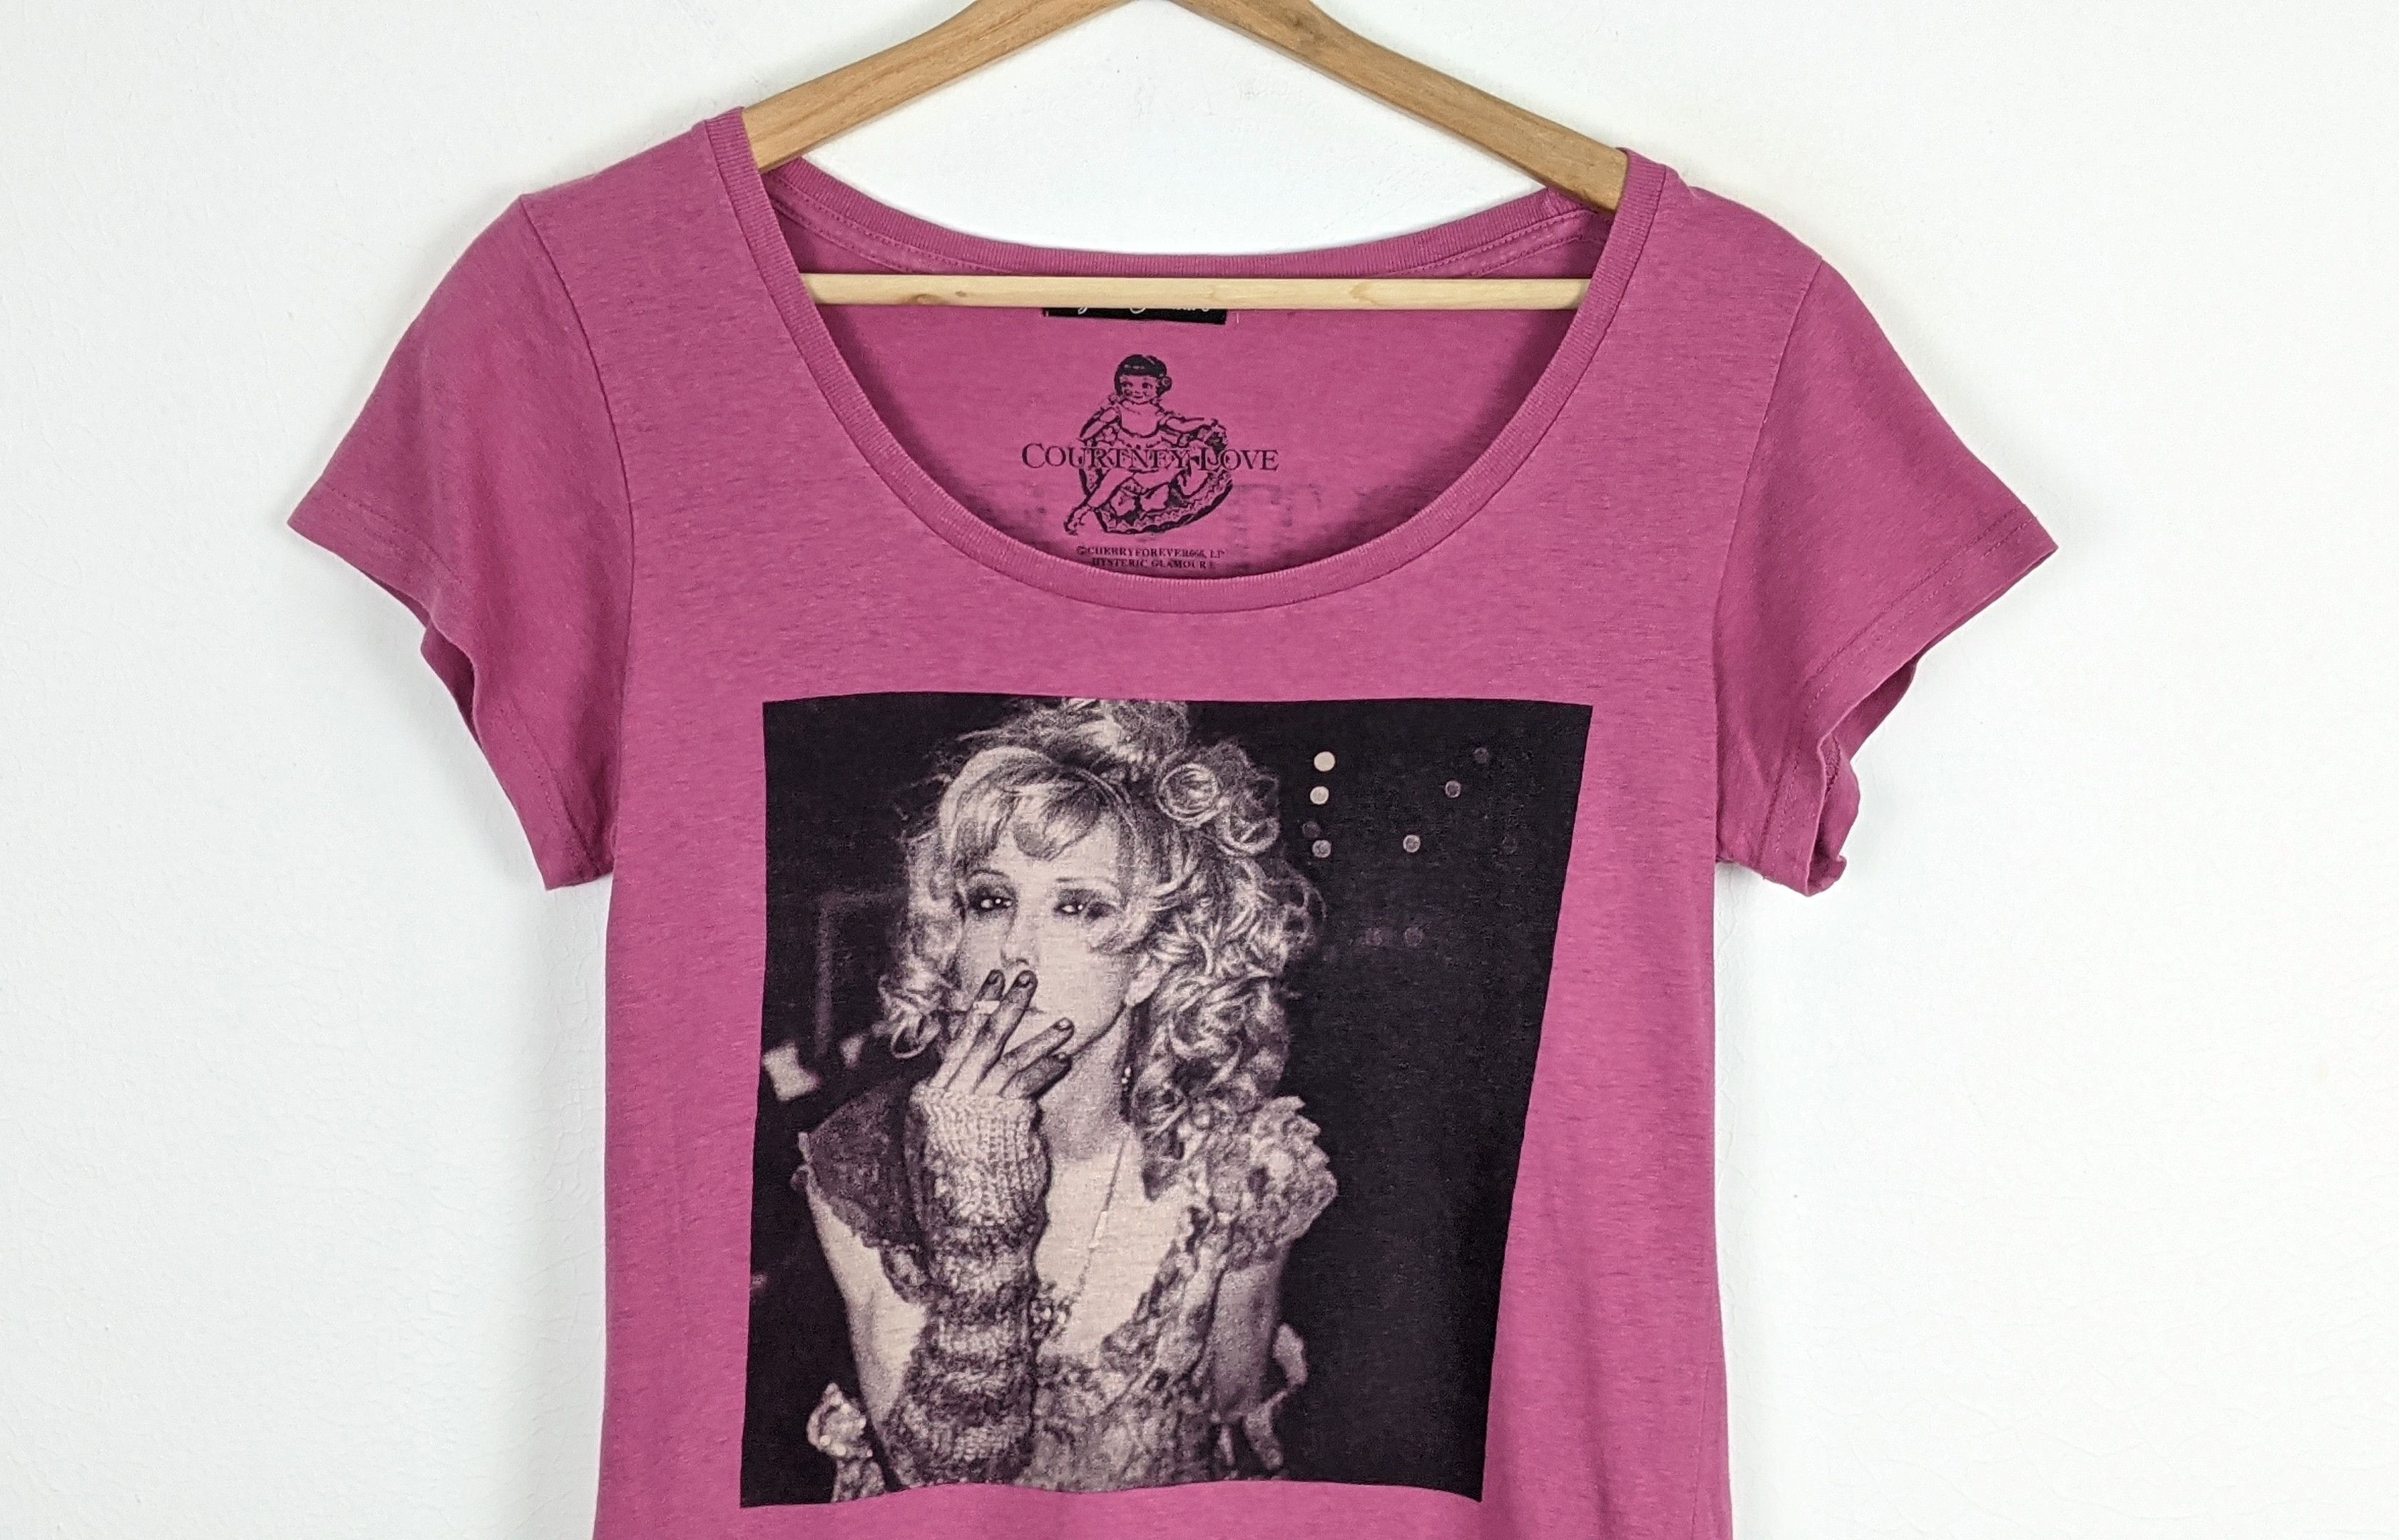 Hysteric Glamour x Courtney Love Hole I Will be Swan shirt - 3